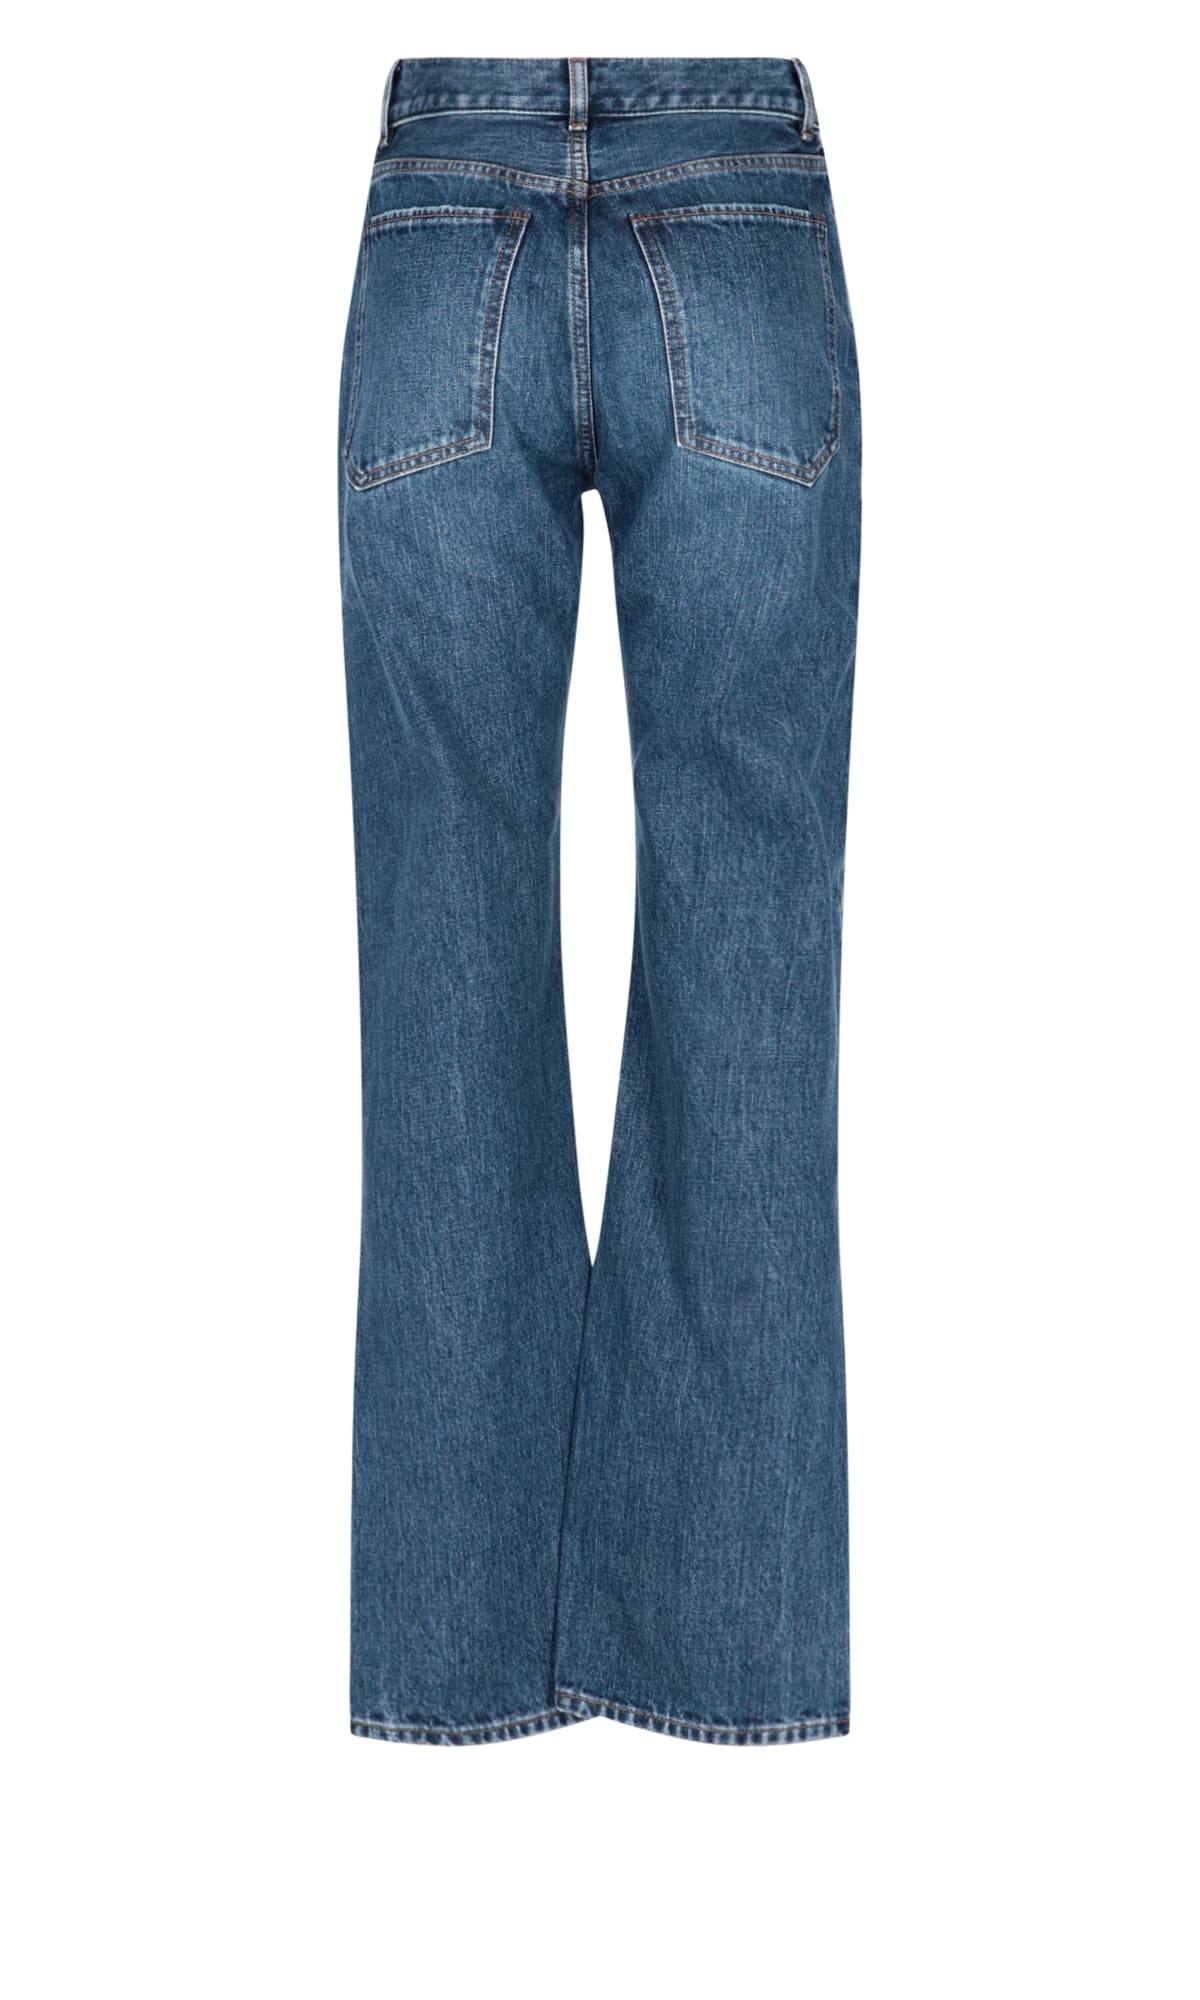 High Rise Flare Leg Jeans in Midnight Shade